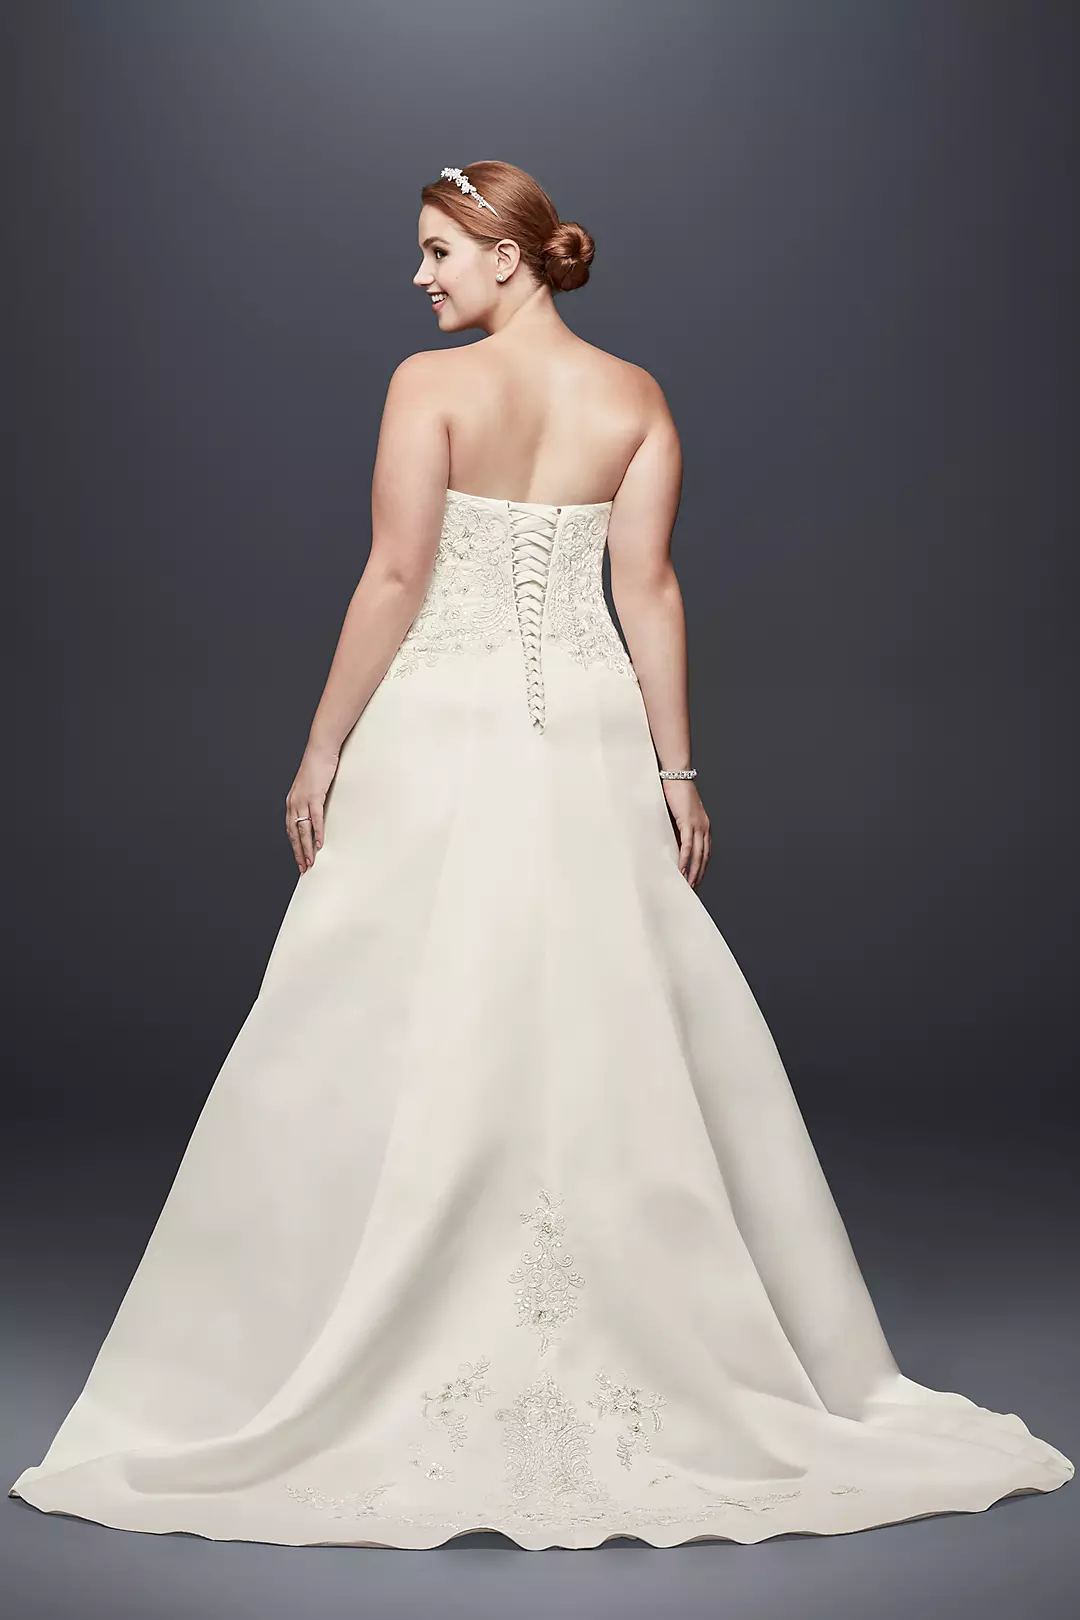 Strapless Satin A-line Wedding Dress with Beading Image 2